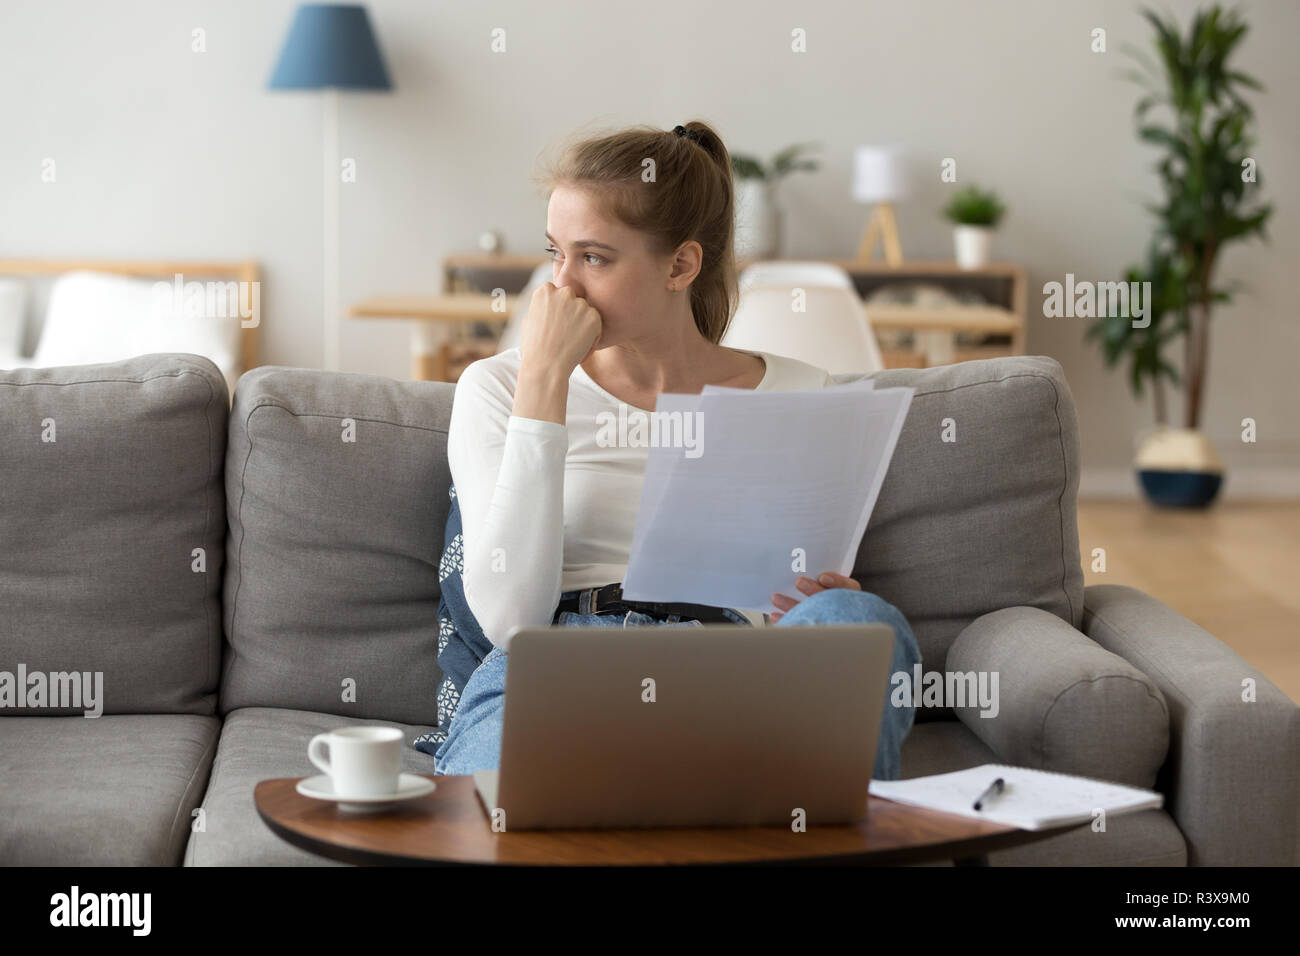 Thoughtful young female distracted from studying looking away Stock Photo